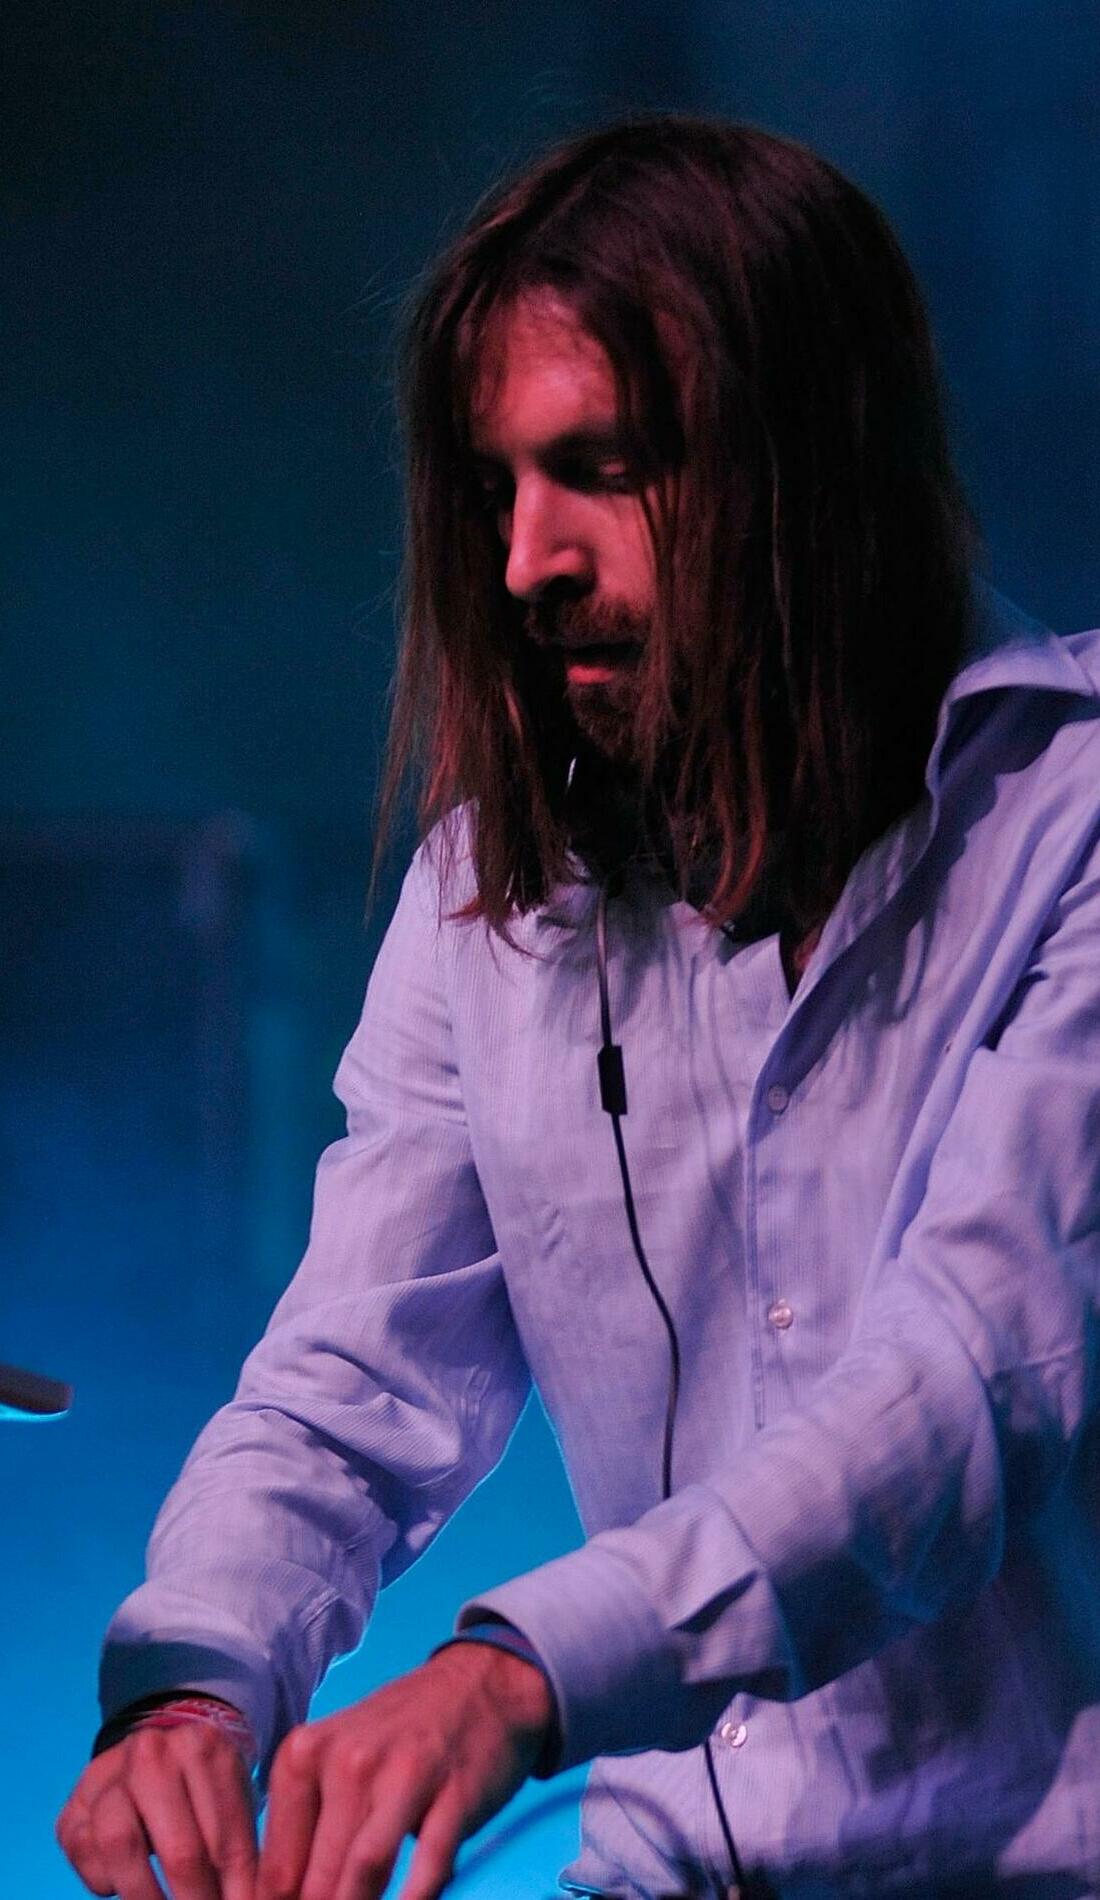 A Breakbot live event